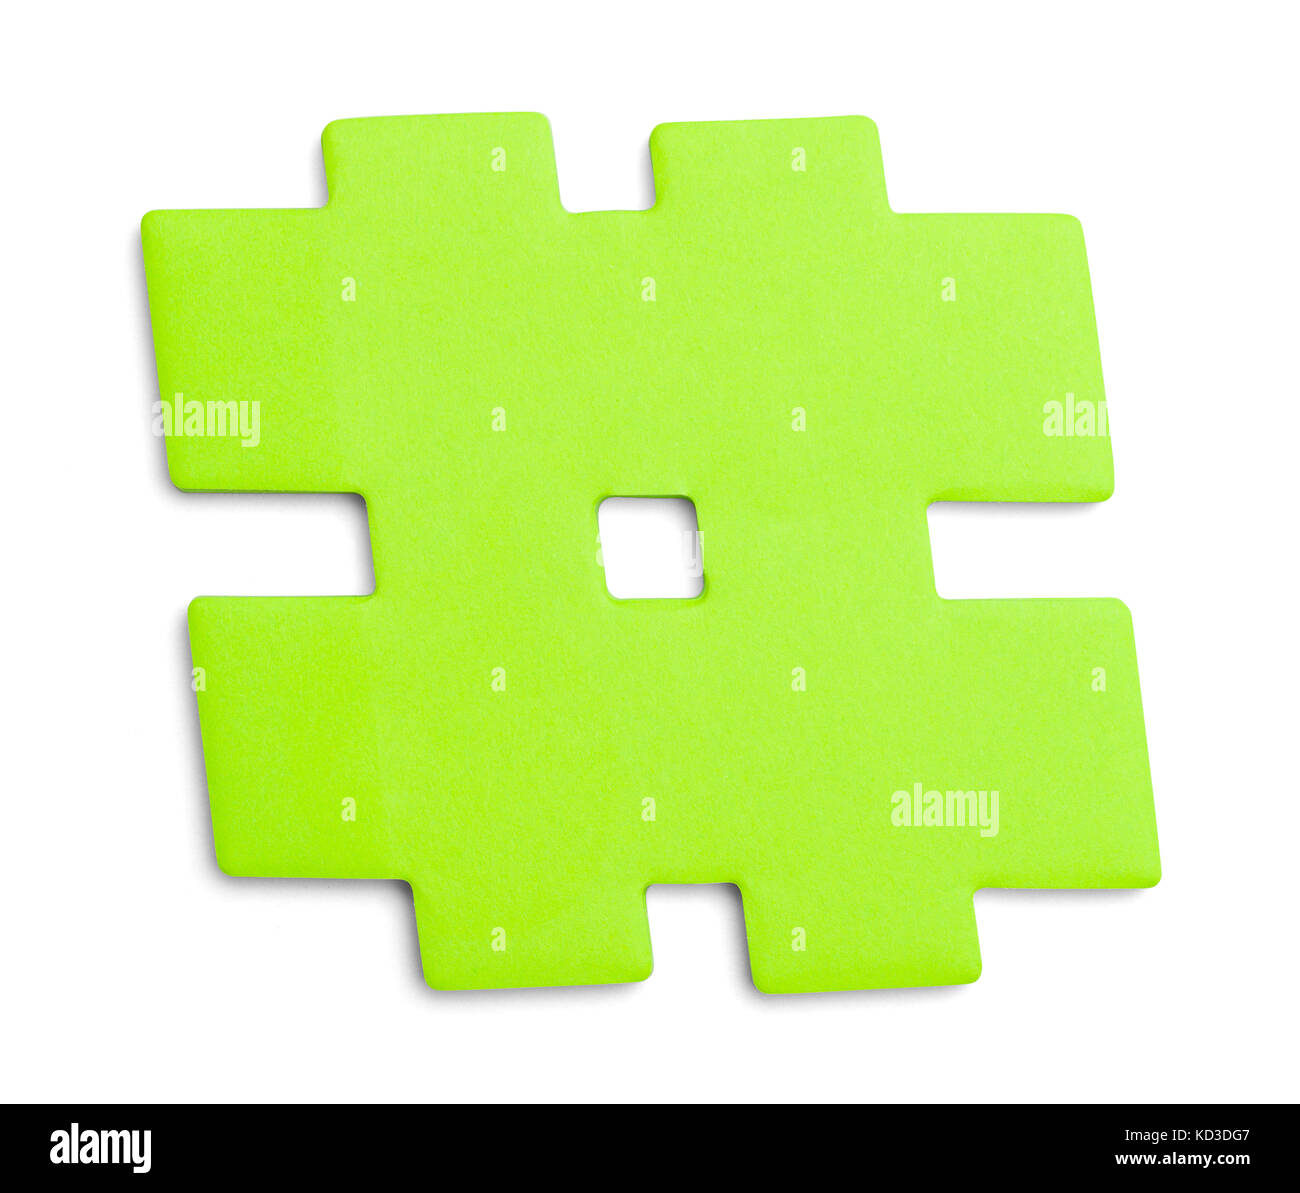 Green Hash Tag Note Pad Isolated on a White Background. Stock Photo